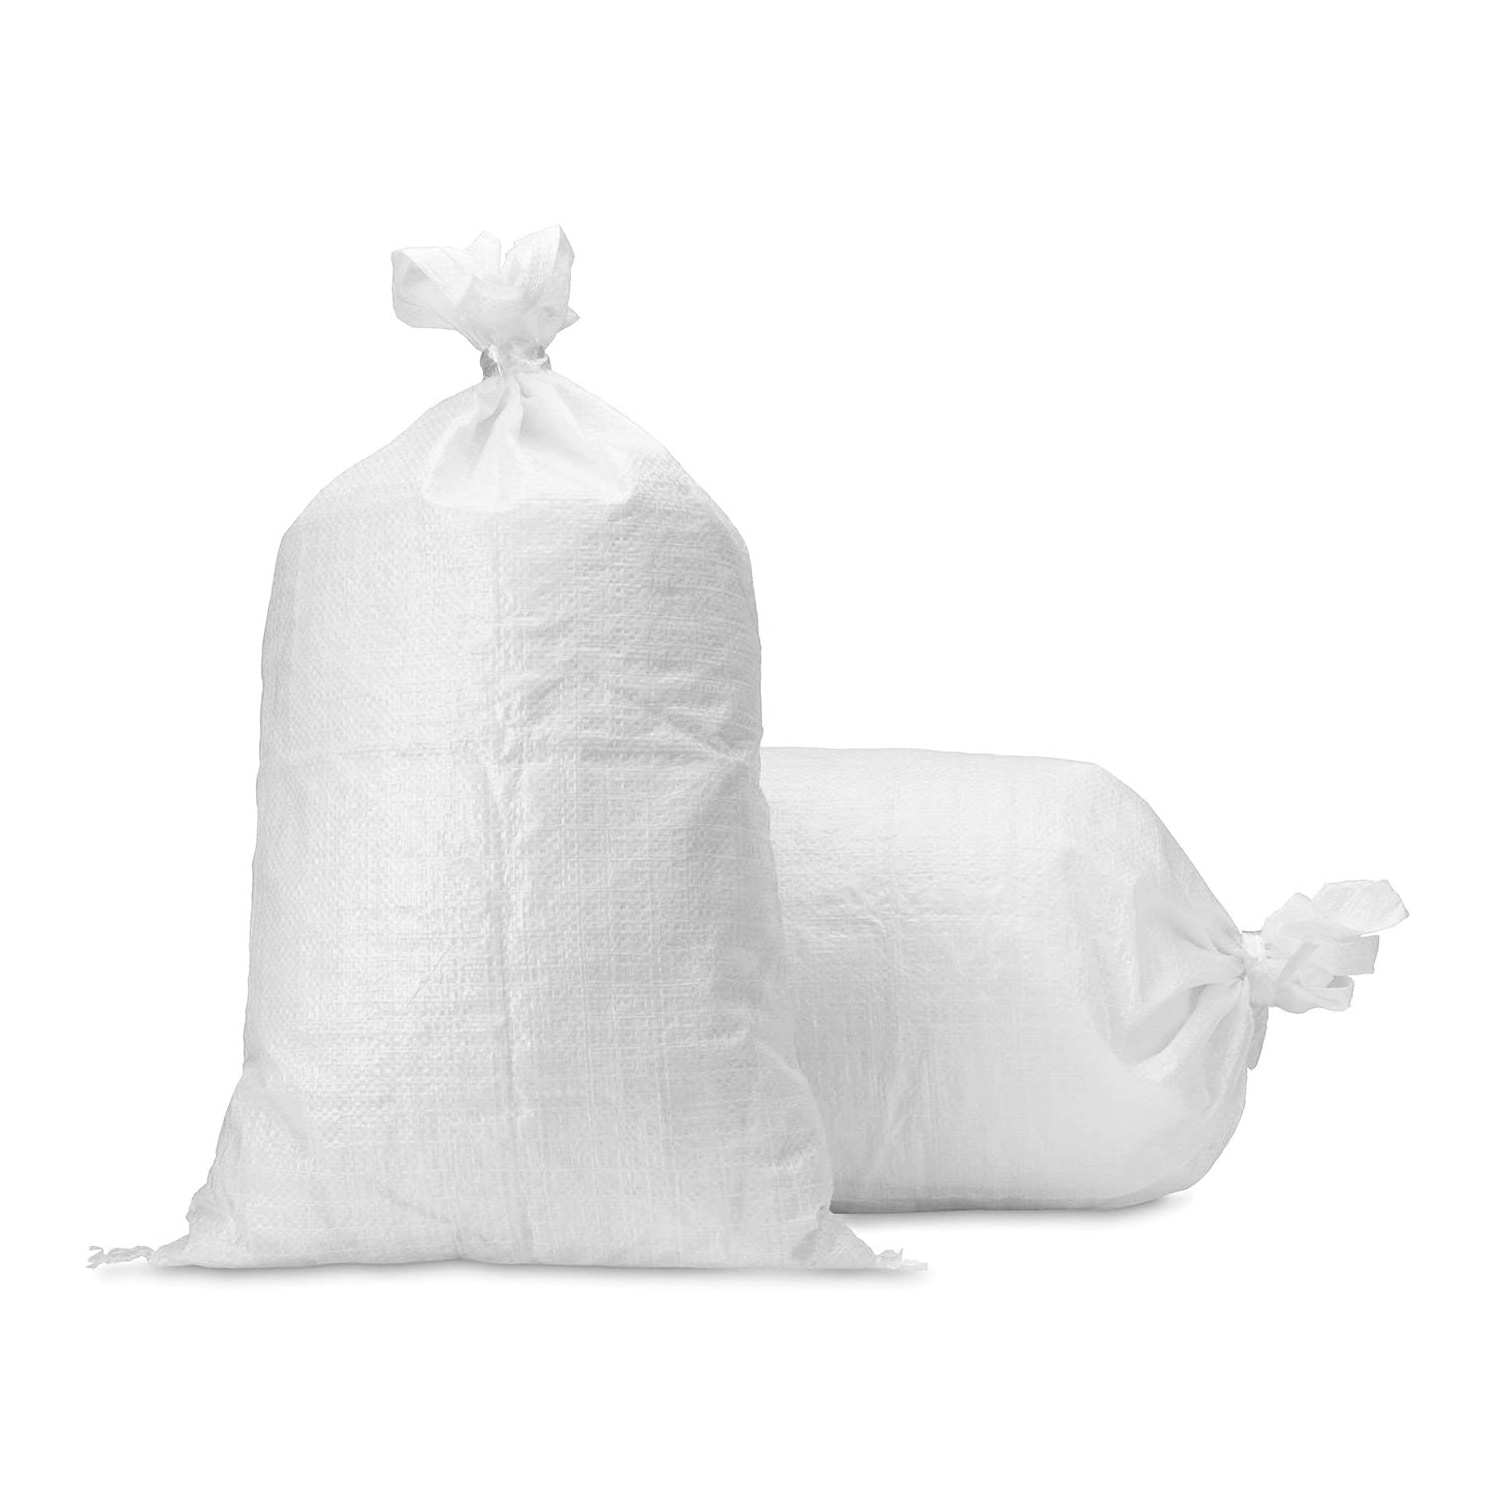 Empty Woven Polypropylene Sandbags with Built-in Ties Green Qty of 100 Sand Bags UV Protection; Size: 14 x 26